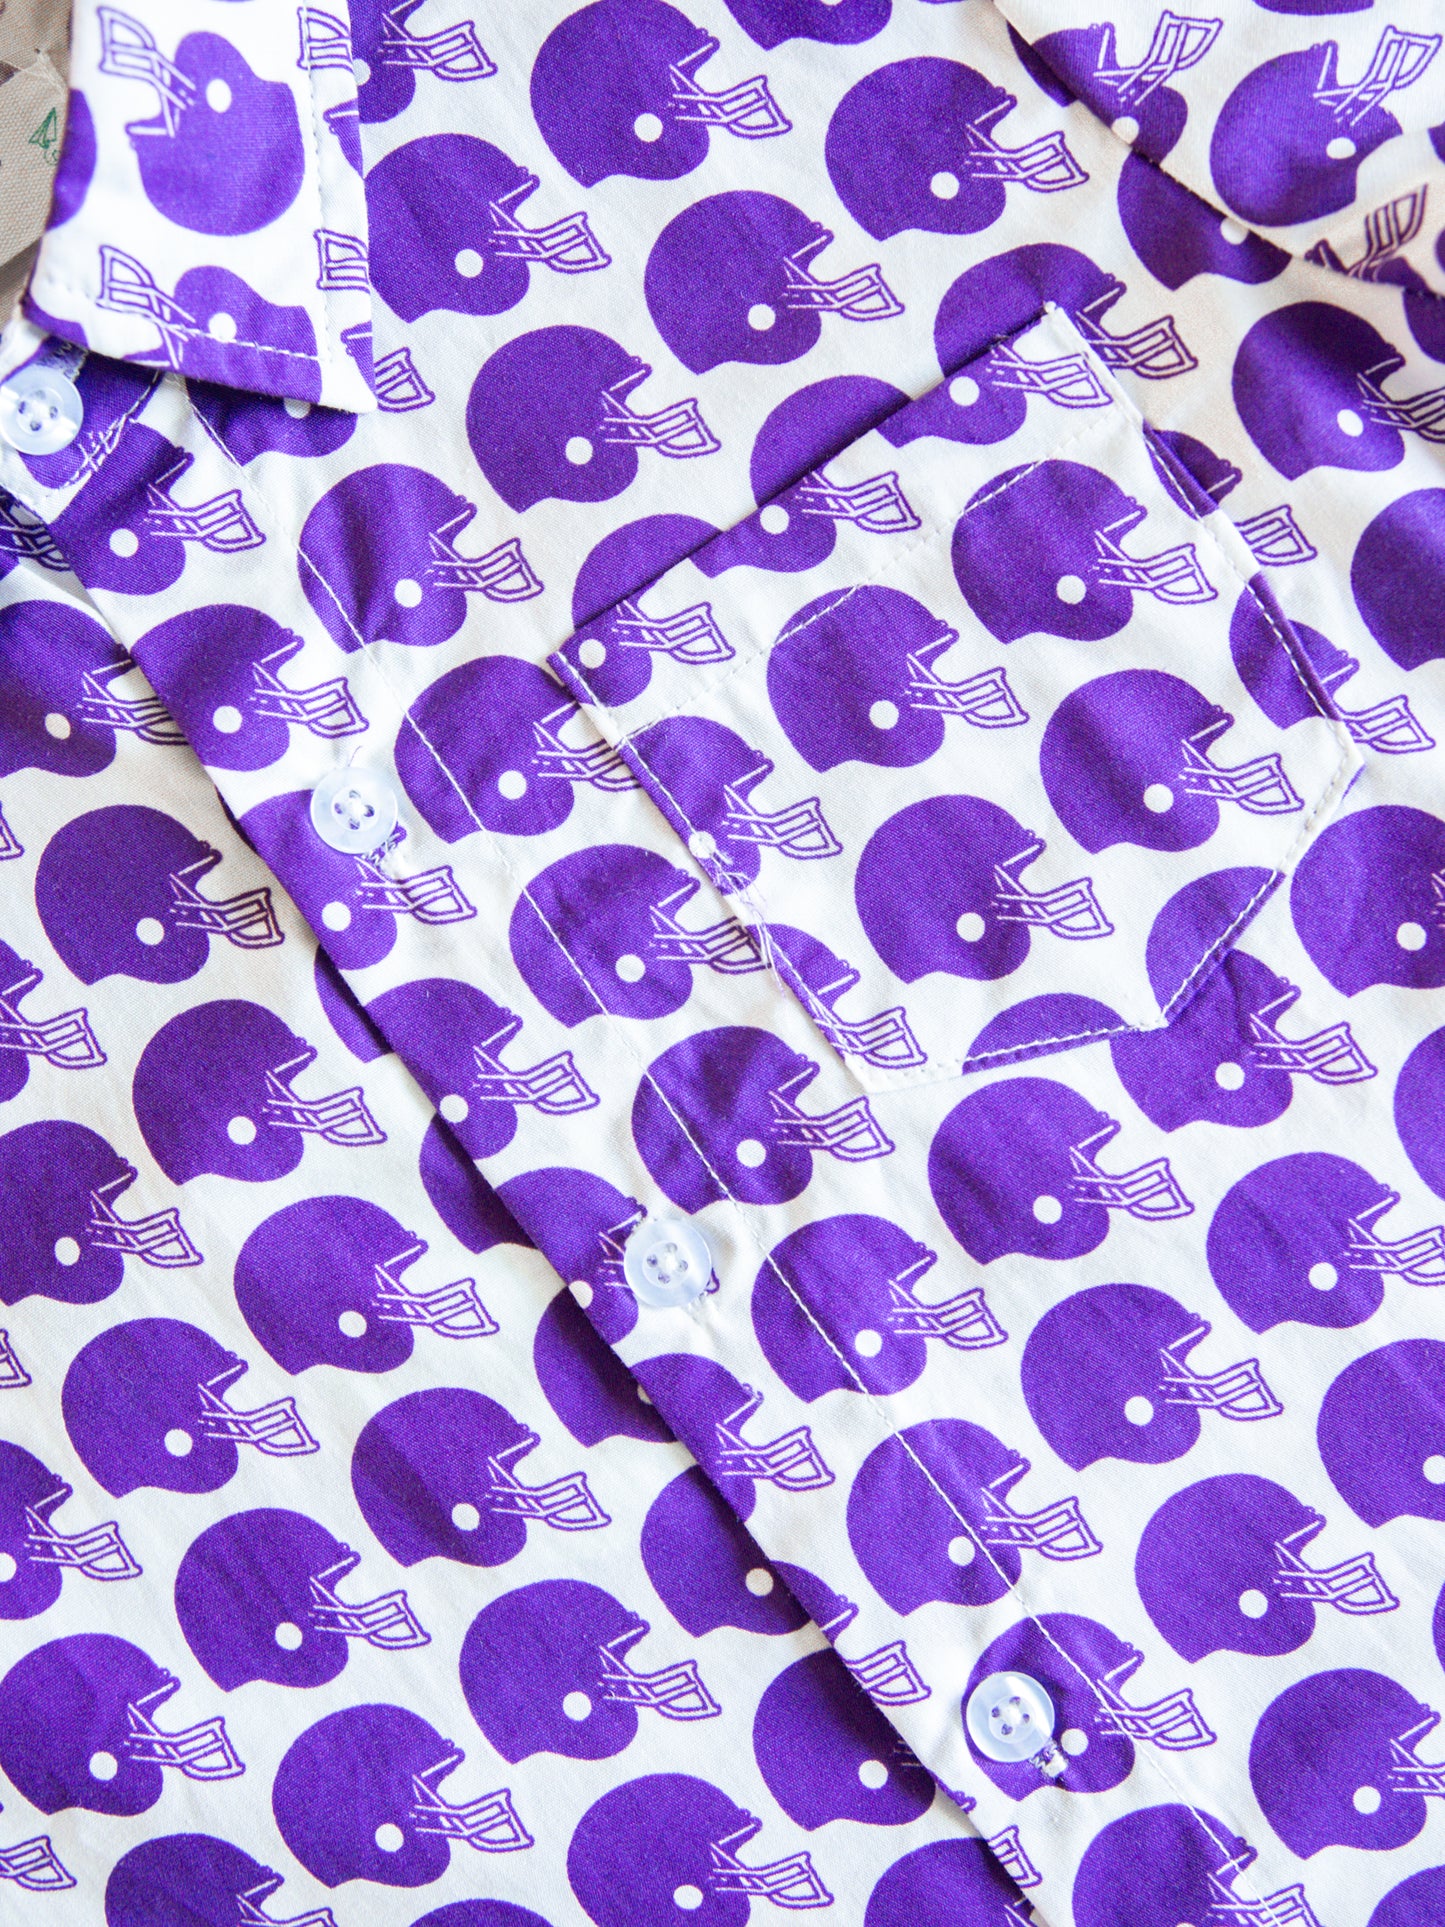 Gameday Button Up Shirt - Poppin' Purple